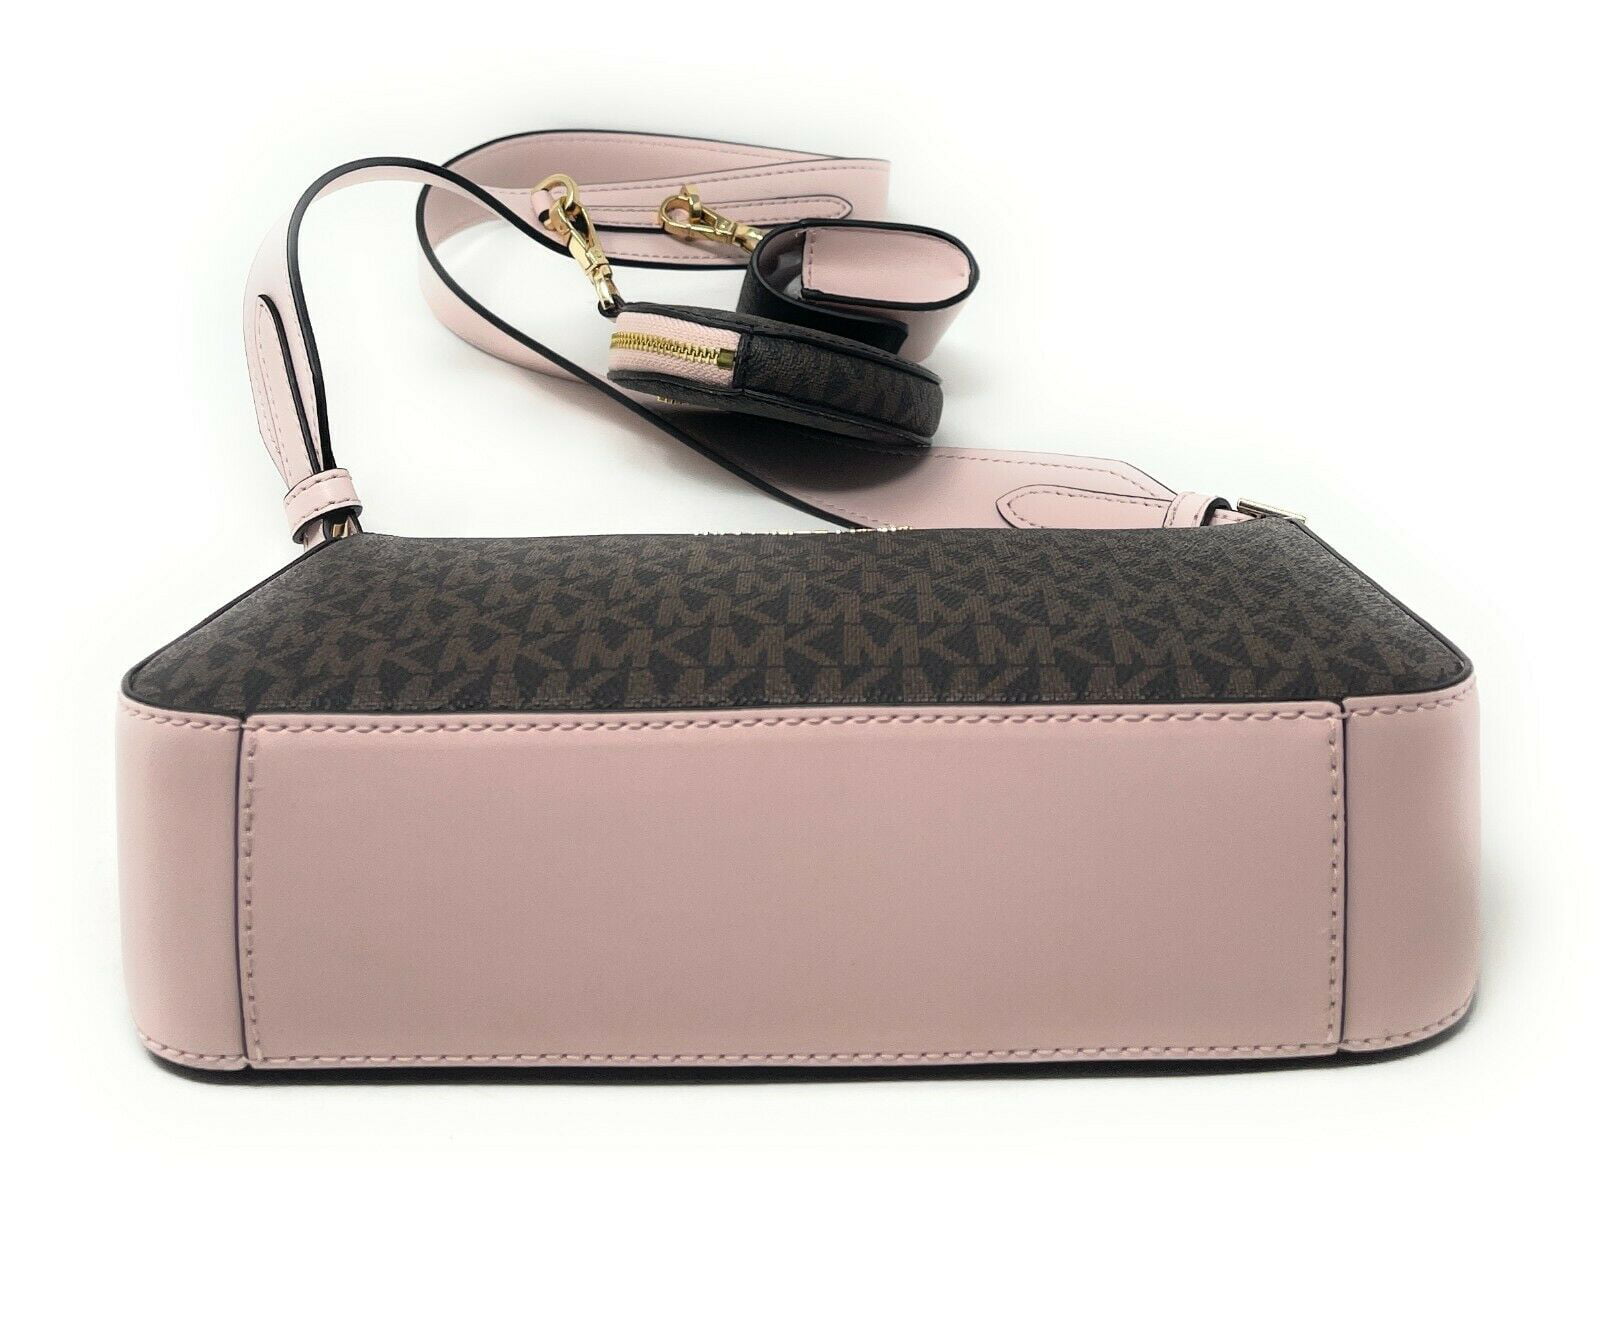 Michael Kors Jet Set Travel Small Crossbody with Tech Attached Leather Bag In Blush Walmart.com